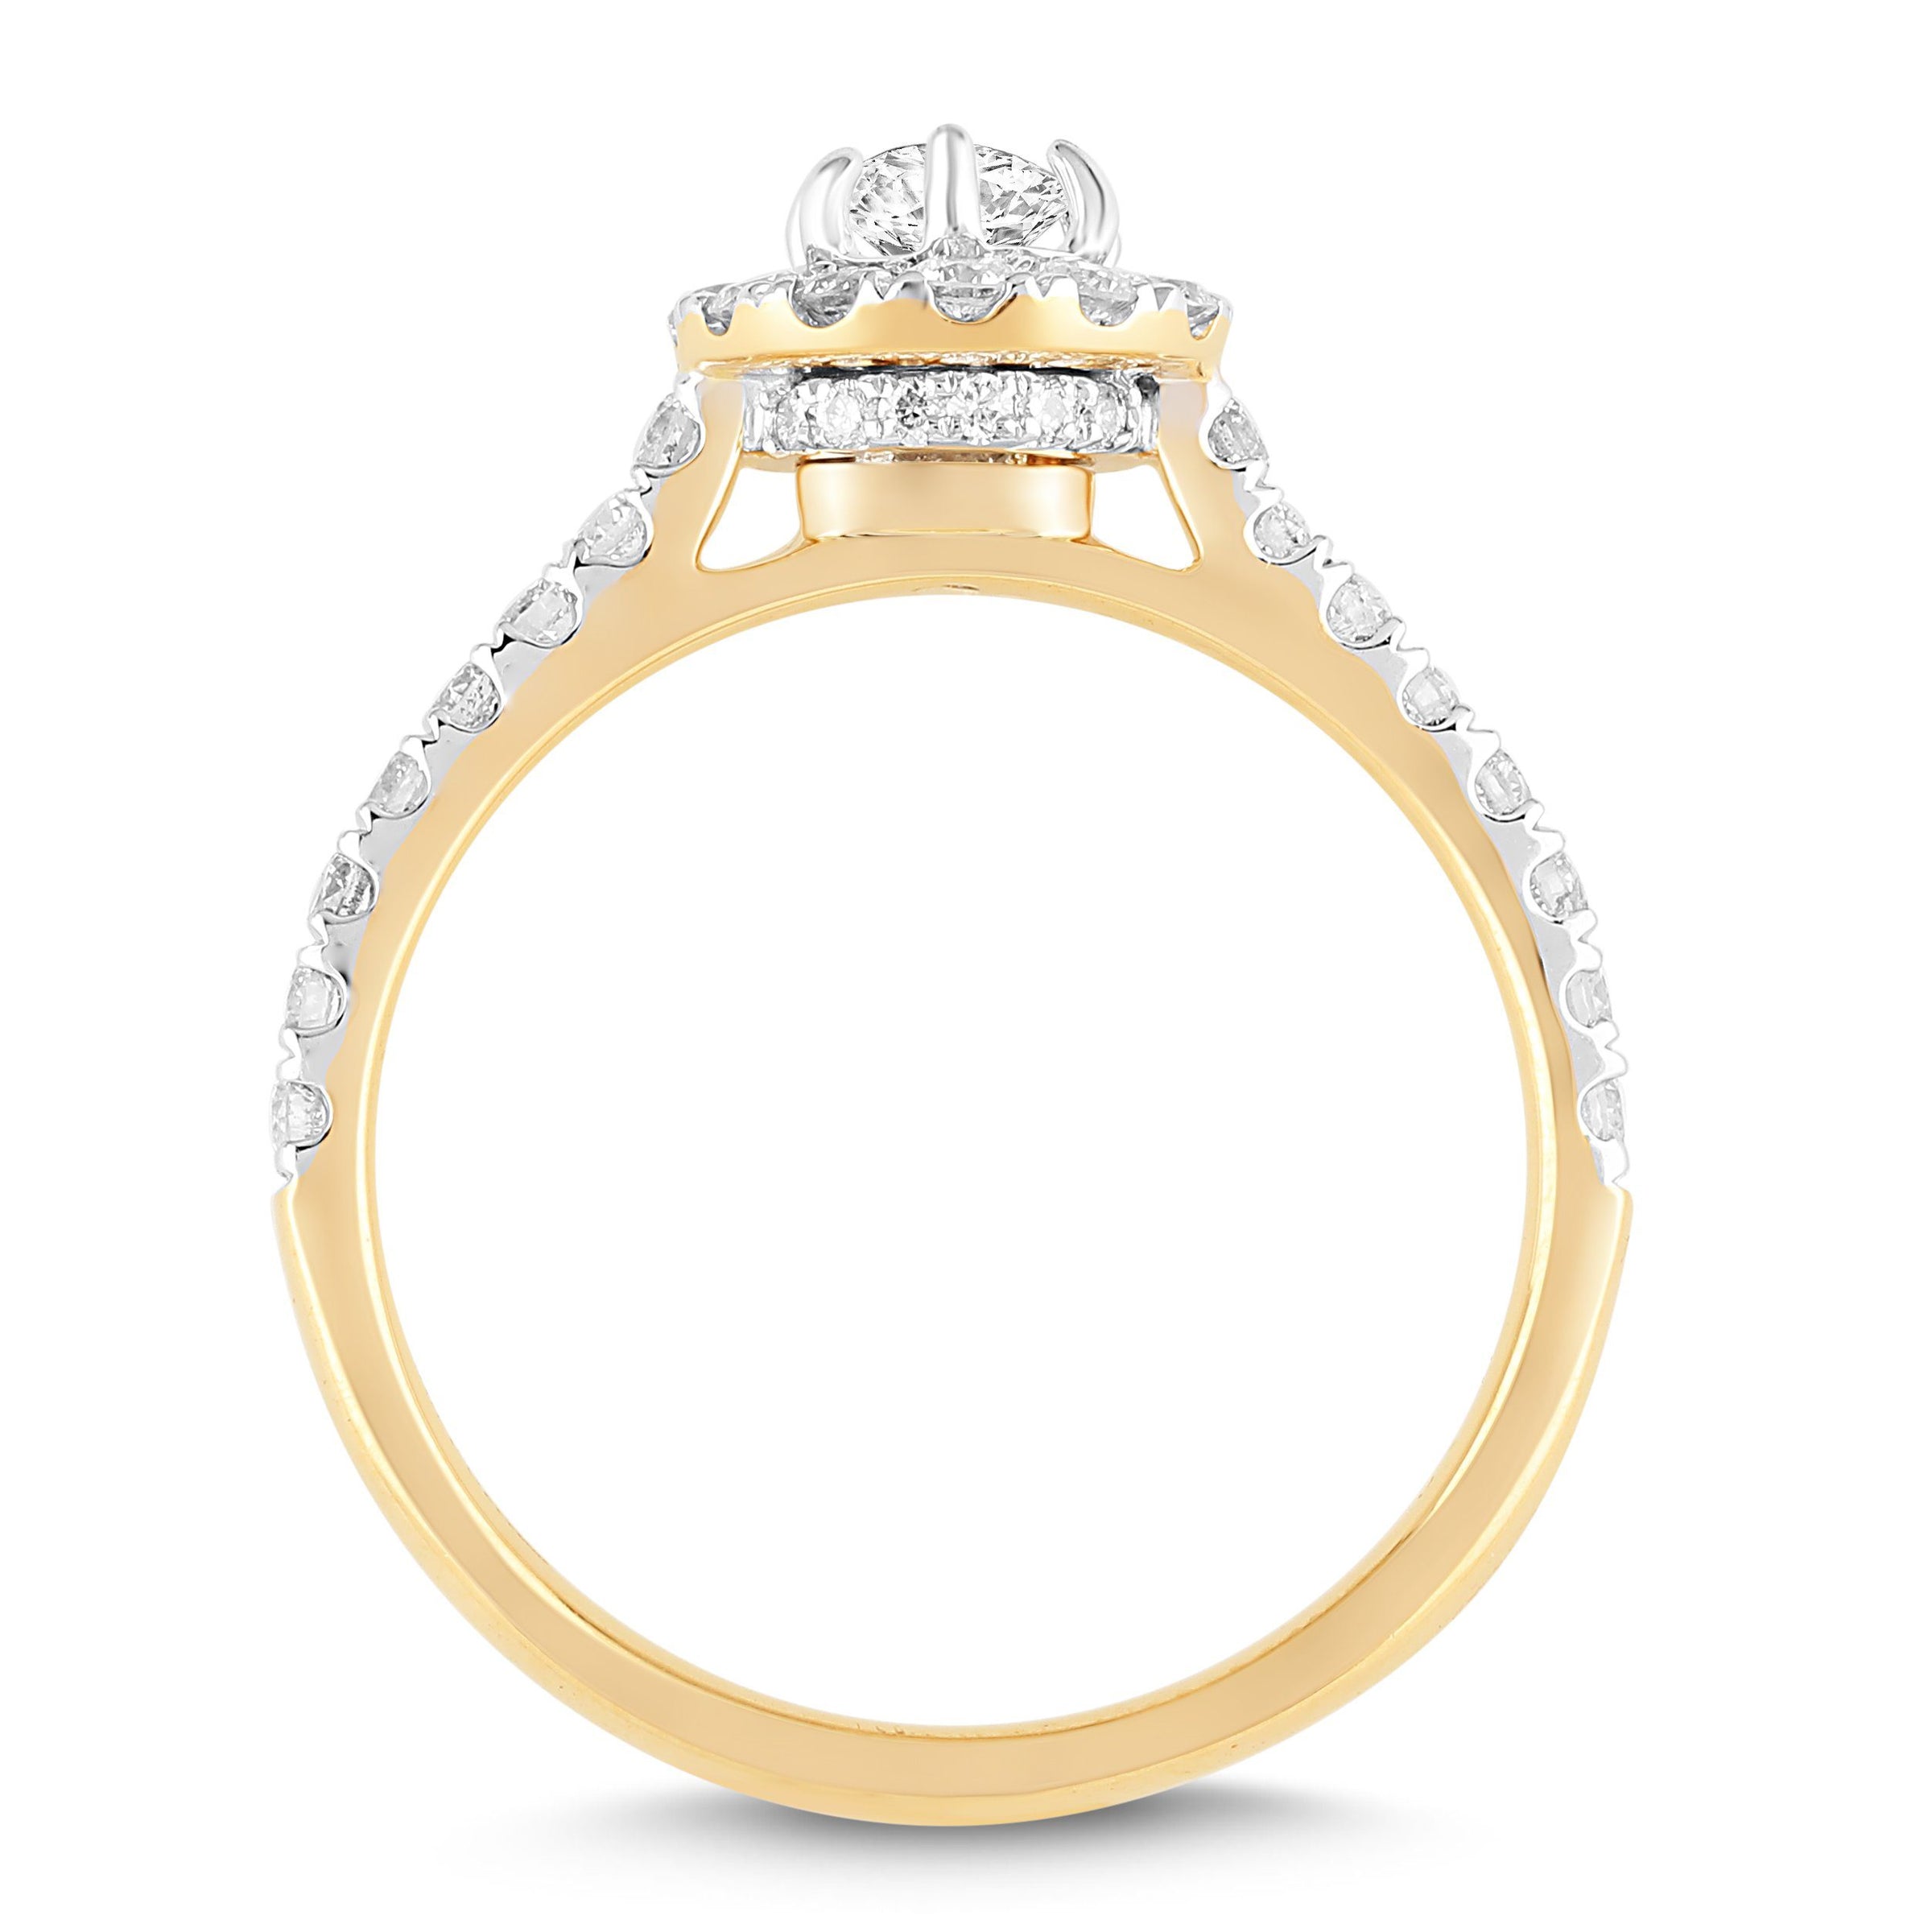 Love by Michelle Beville Halo Solitaire Ring with 0.90ct of Diamonds in 18ct Yellow Gold Rings Bevilles 